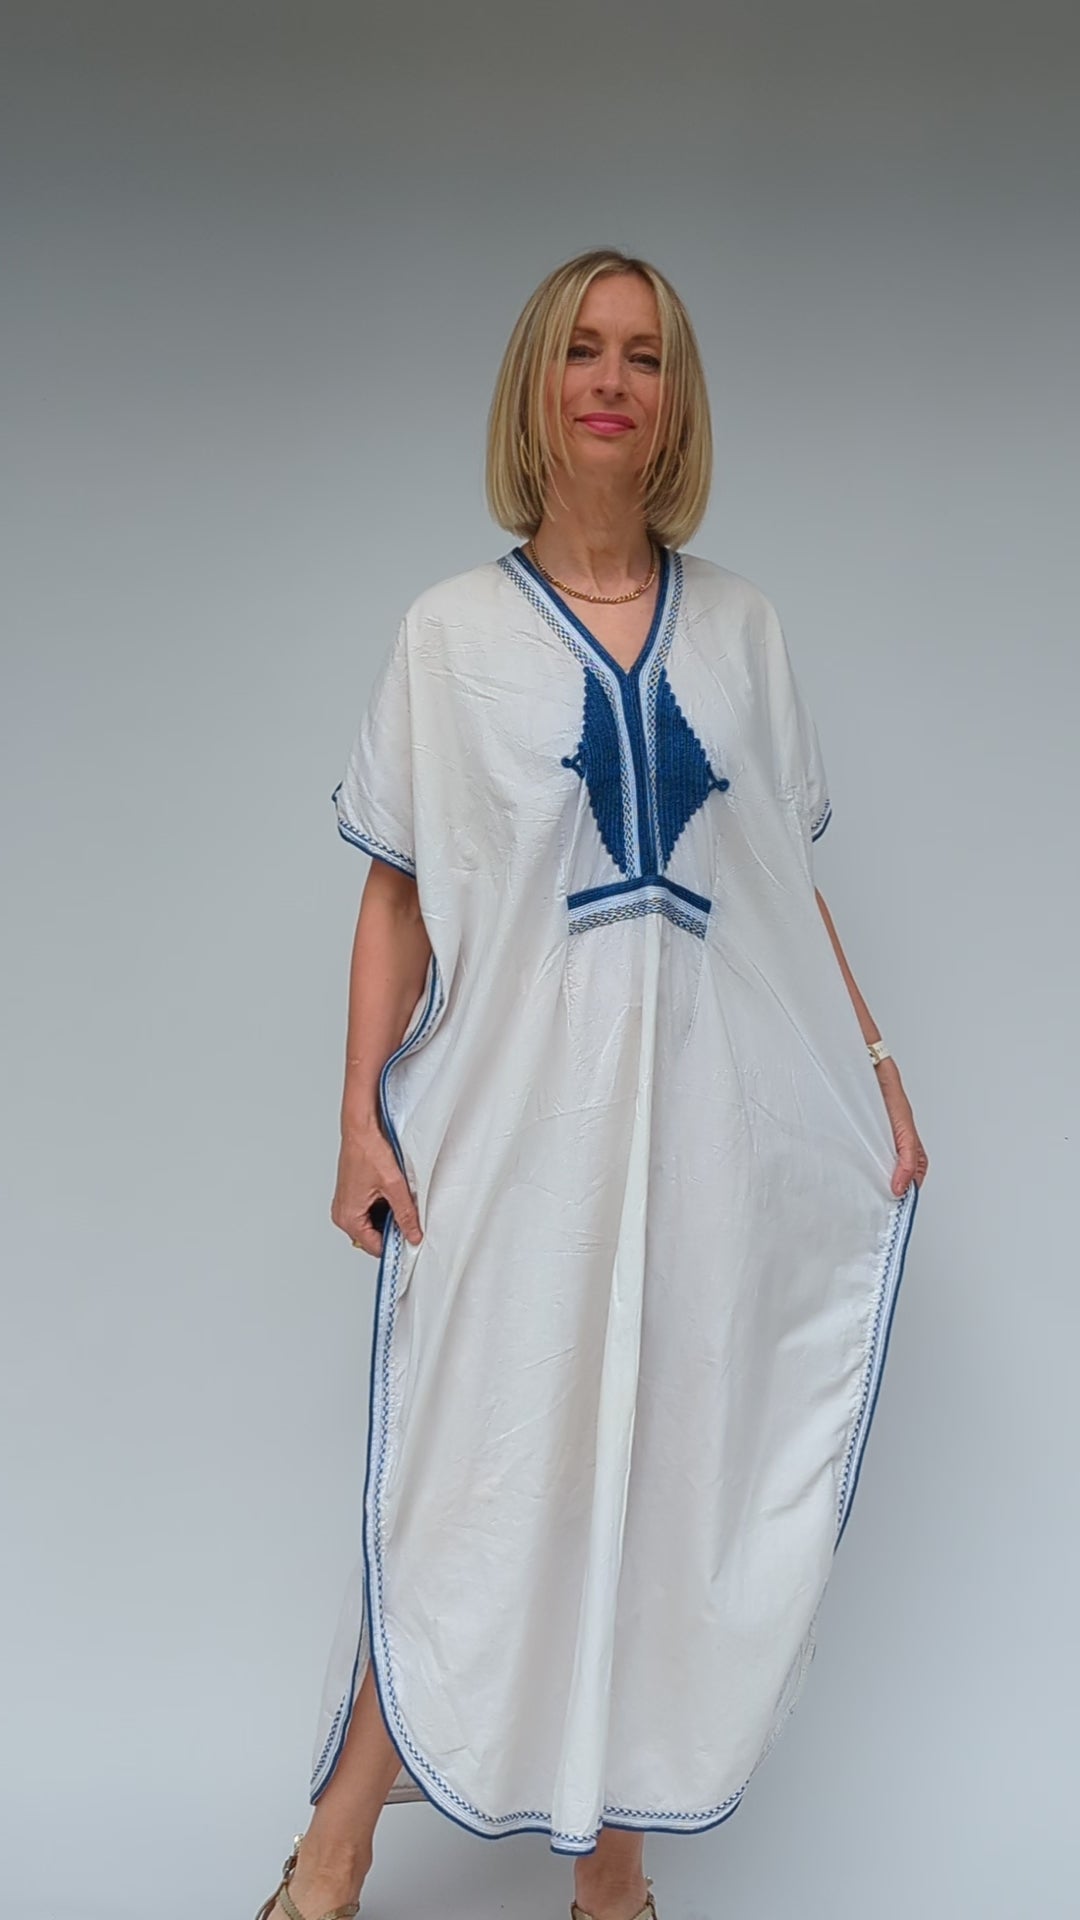 video showing large kaftan dress in white with blue trim